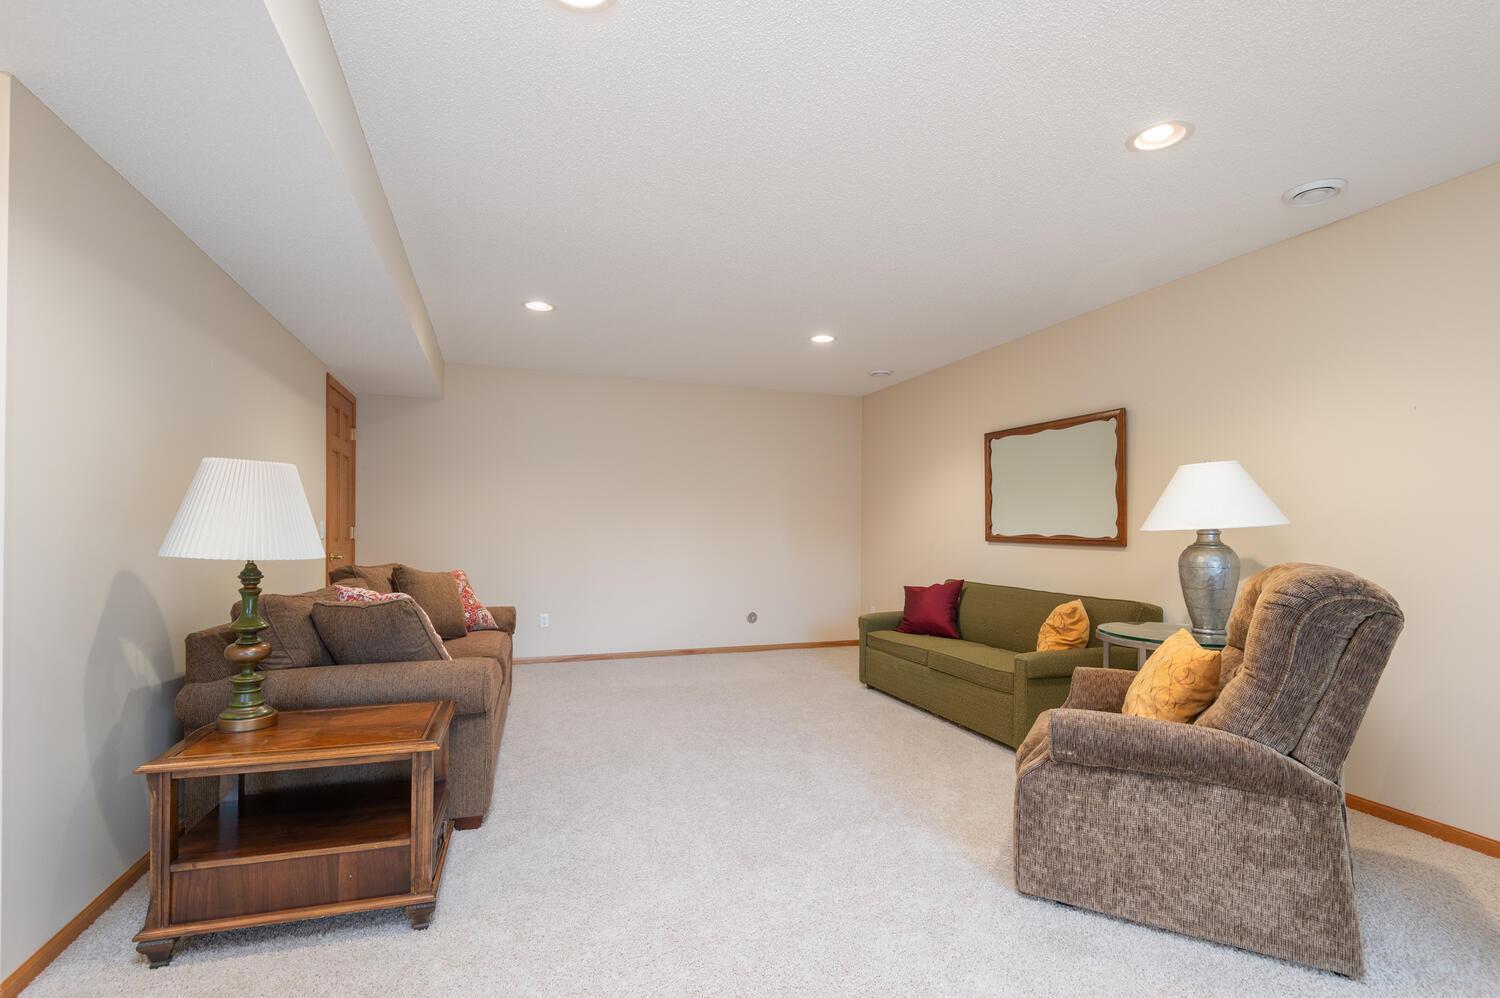 Don't miss the excellent storage beyond this room. There is a large, clean crawl space and finished storage under the stairs.